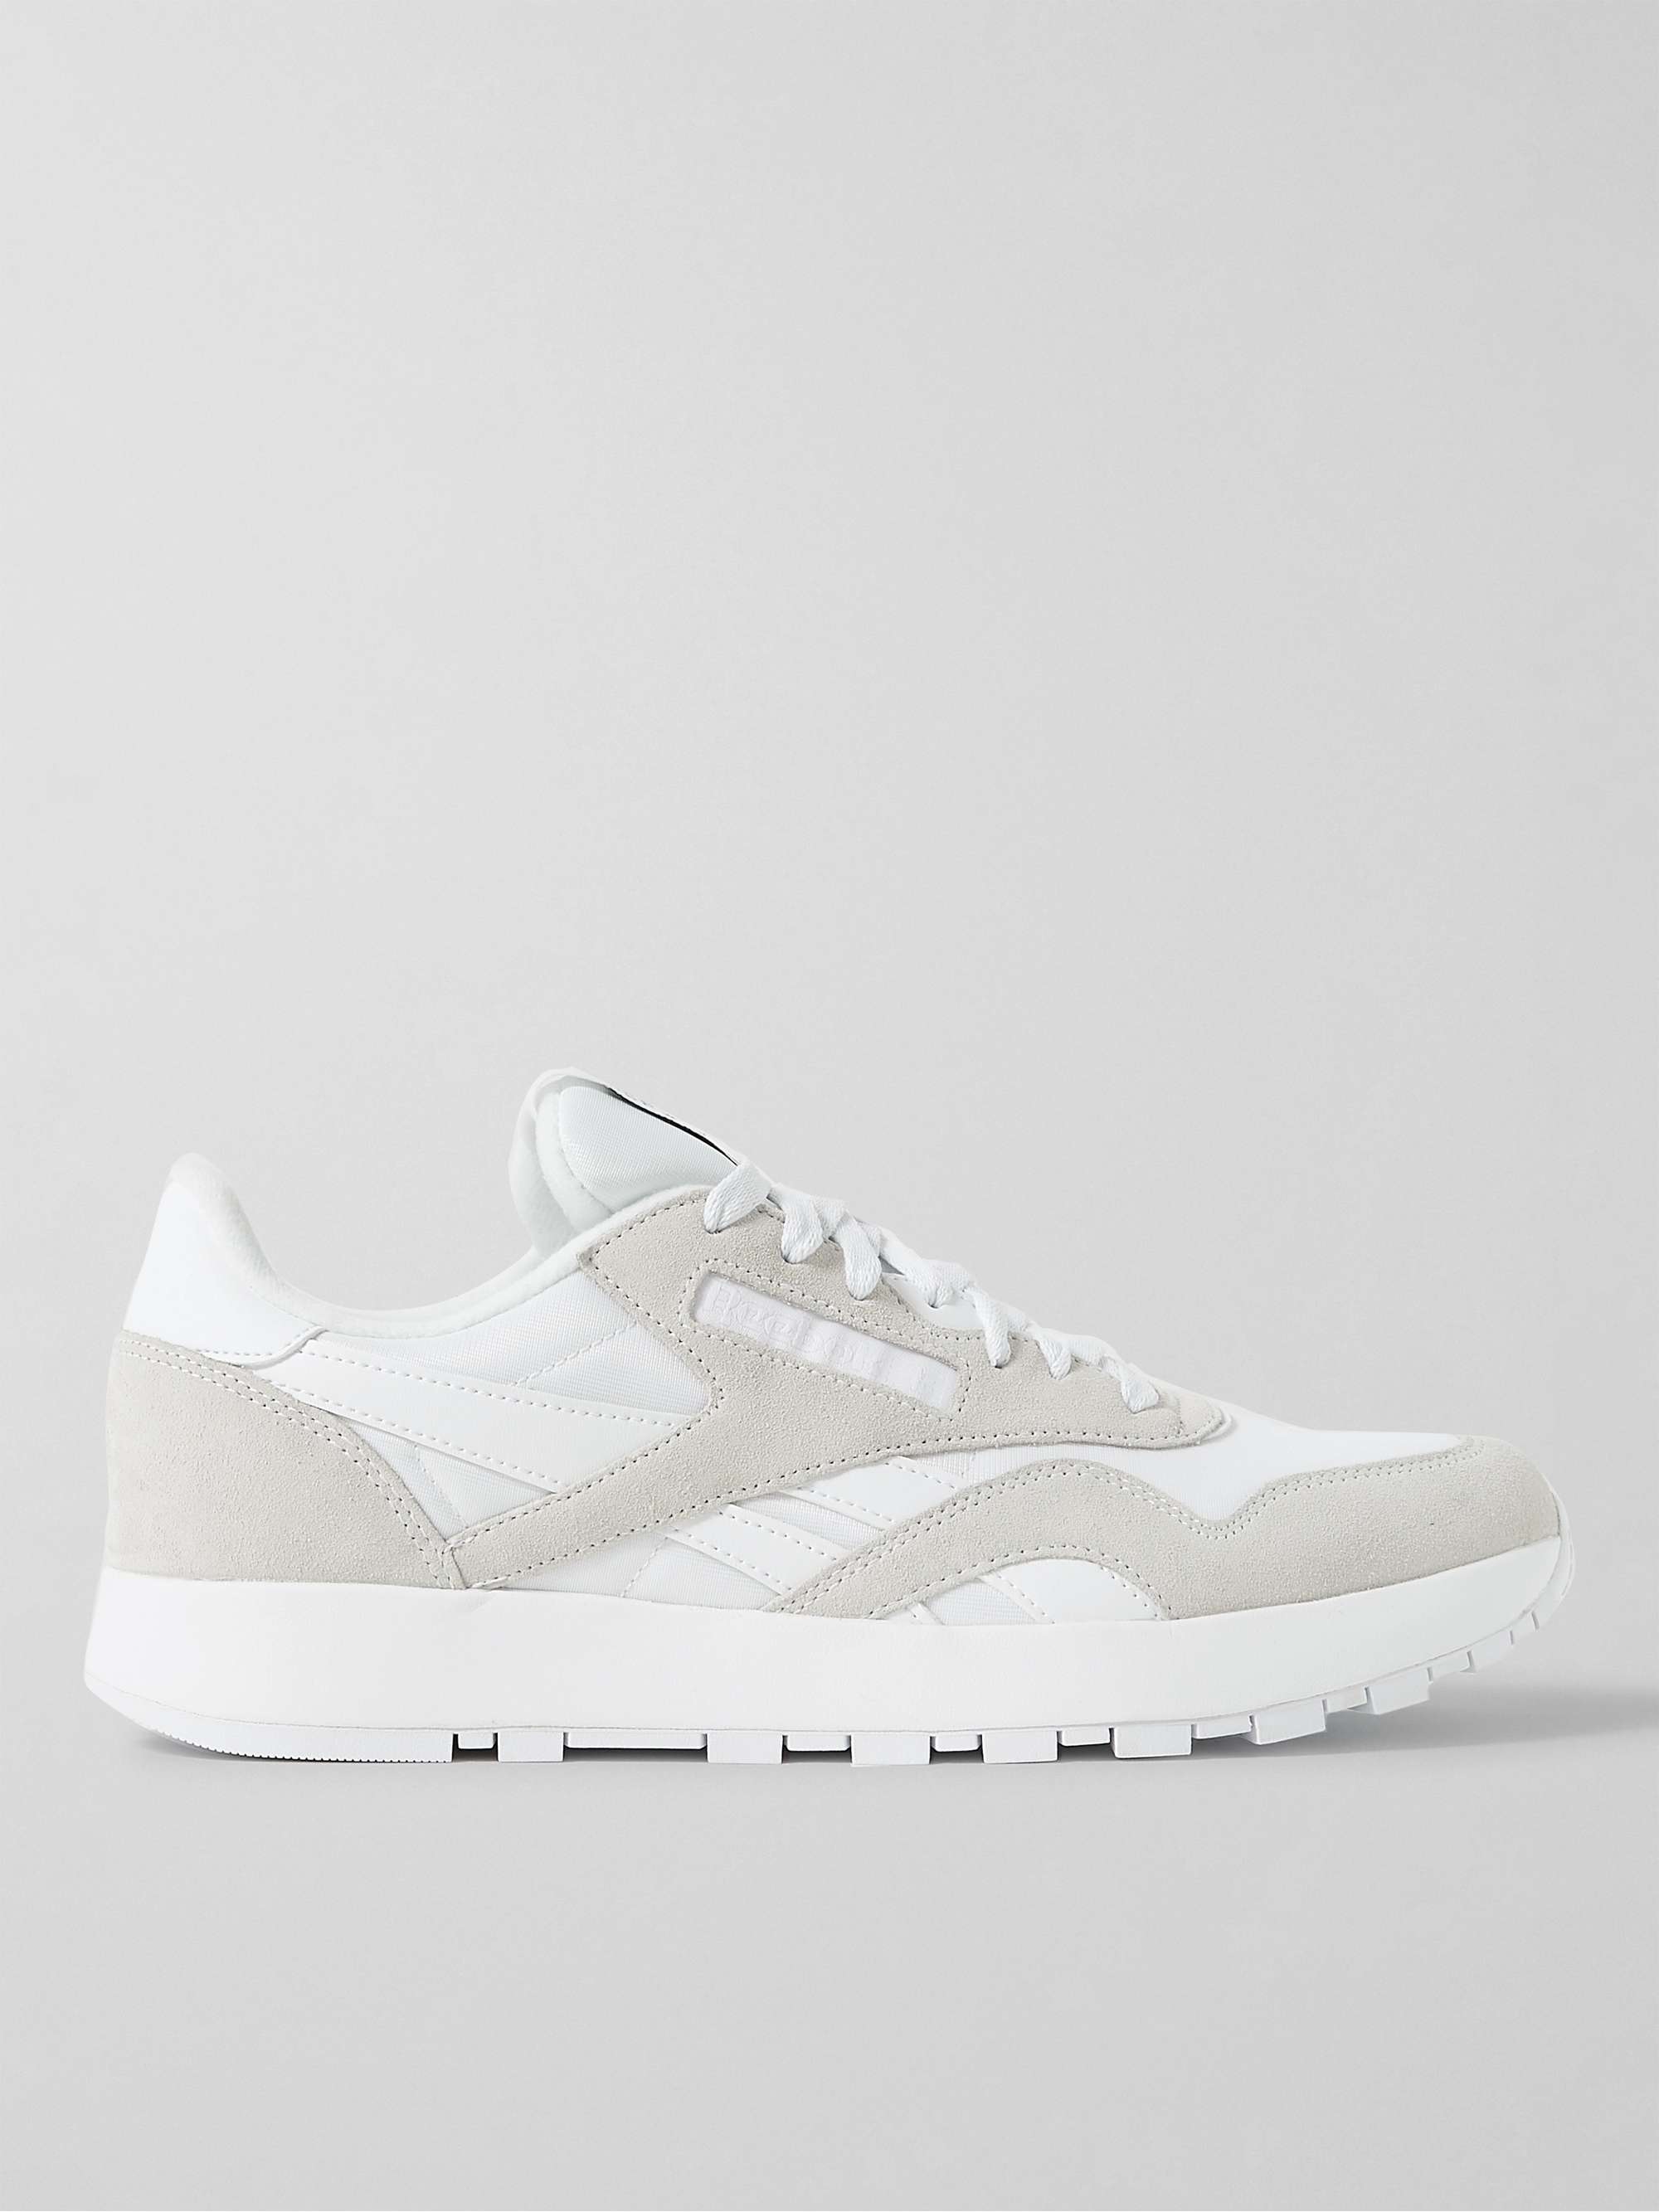 REEBOK + Maison Margiela Project 0 Shell, Suede and Leather Sneakers | MR  PORTER